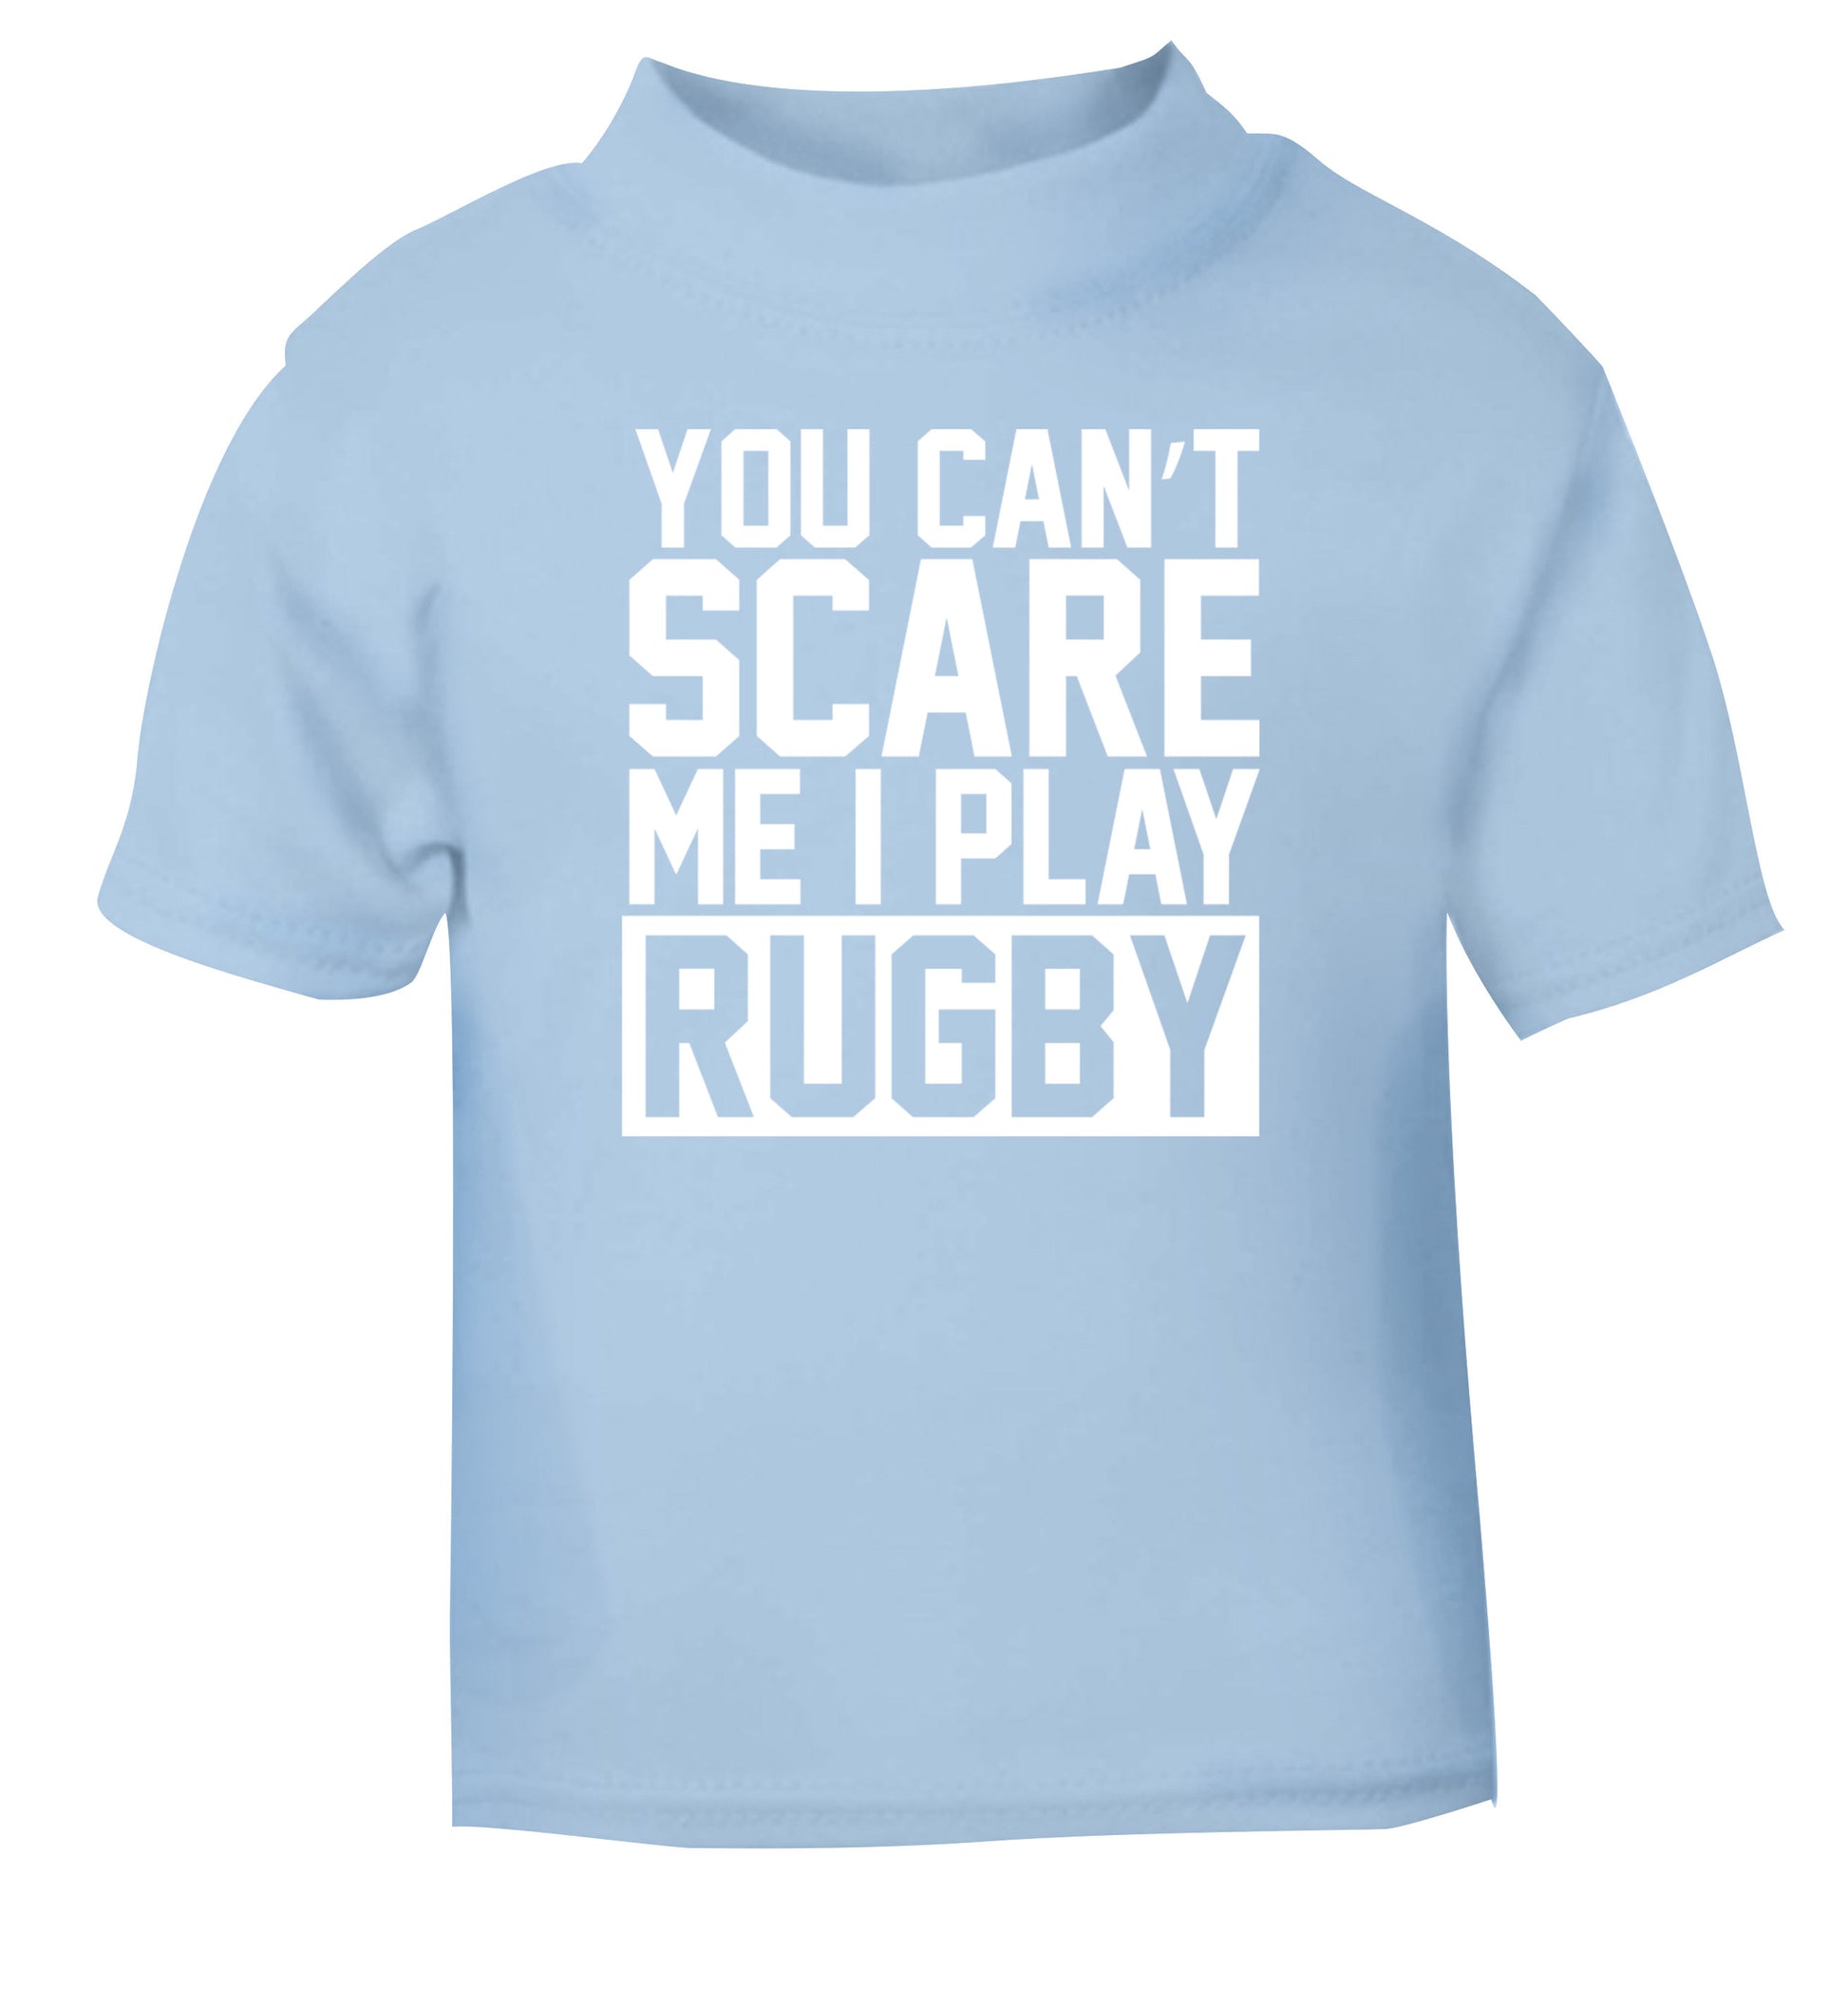 You can't scare me I play rugby light blue Baby Toddler Tshirt 2 Years